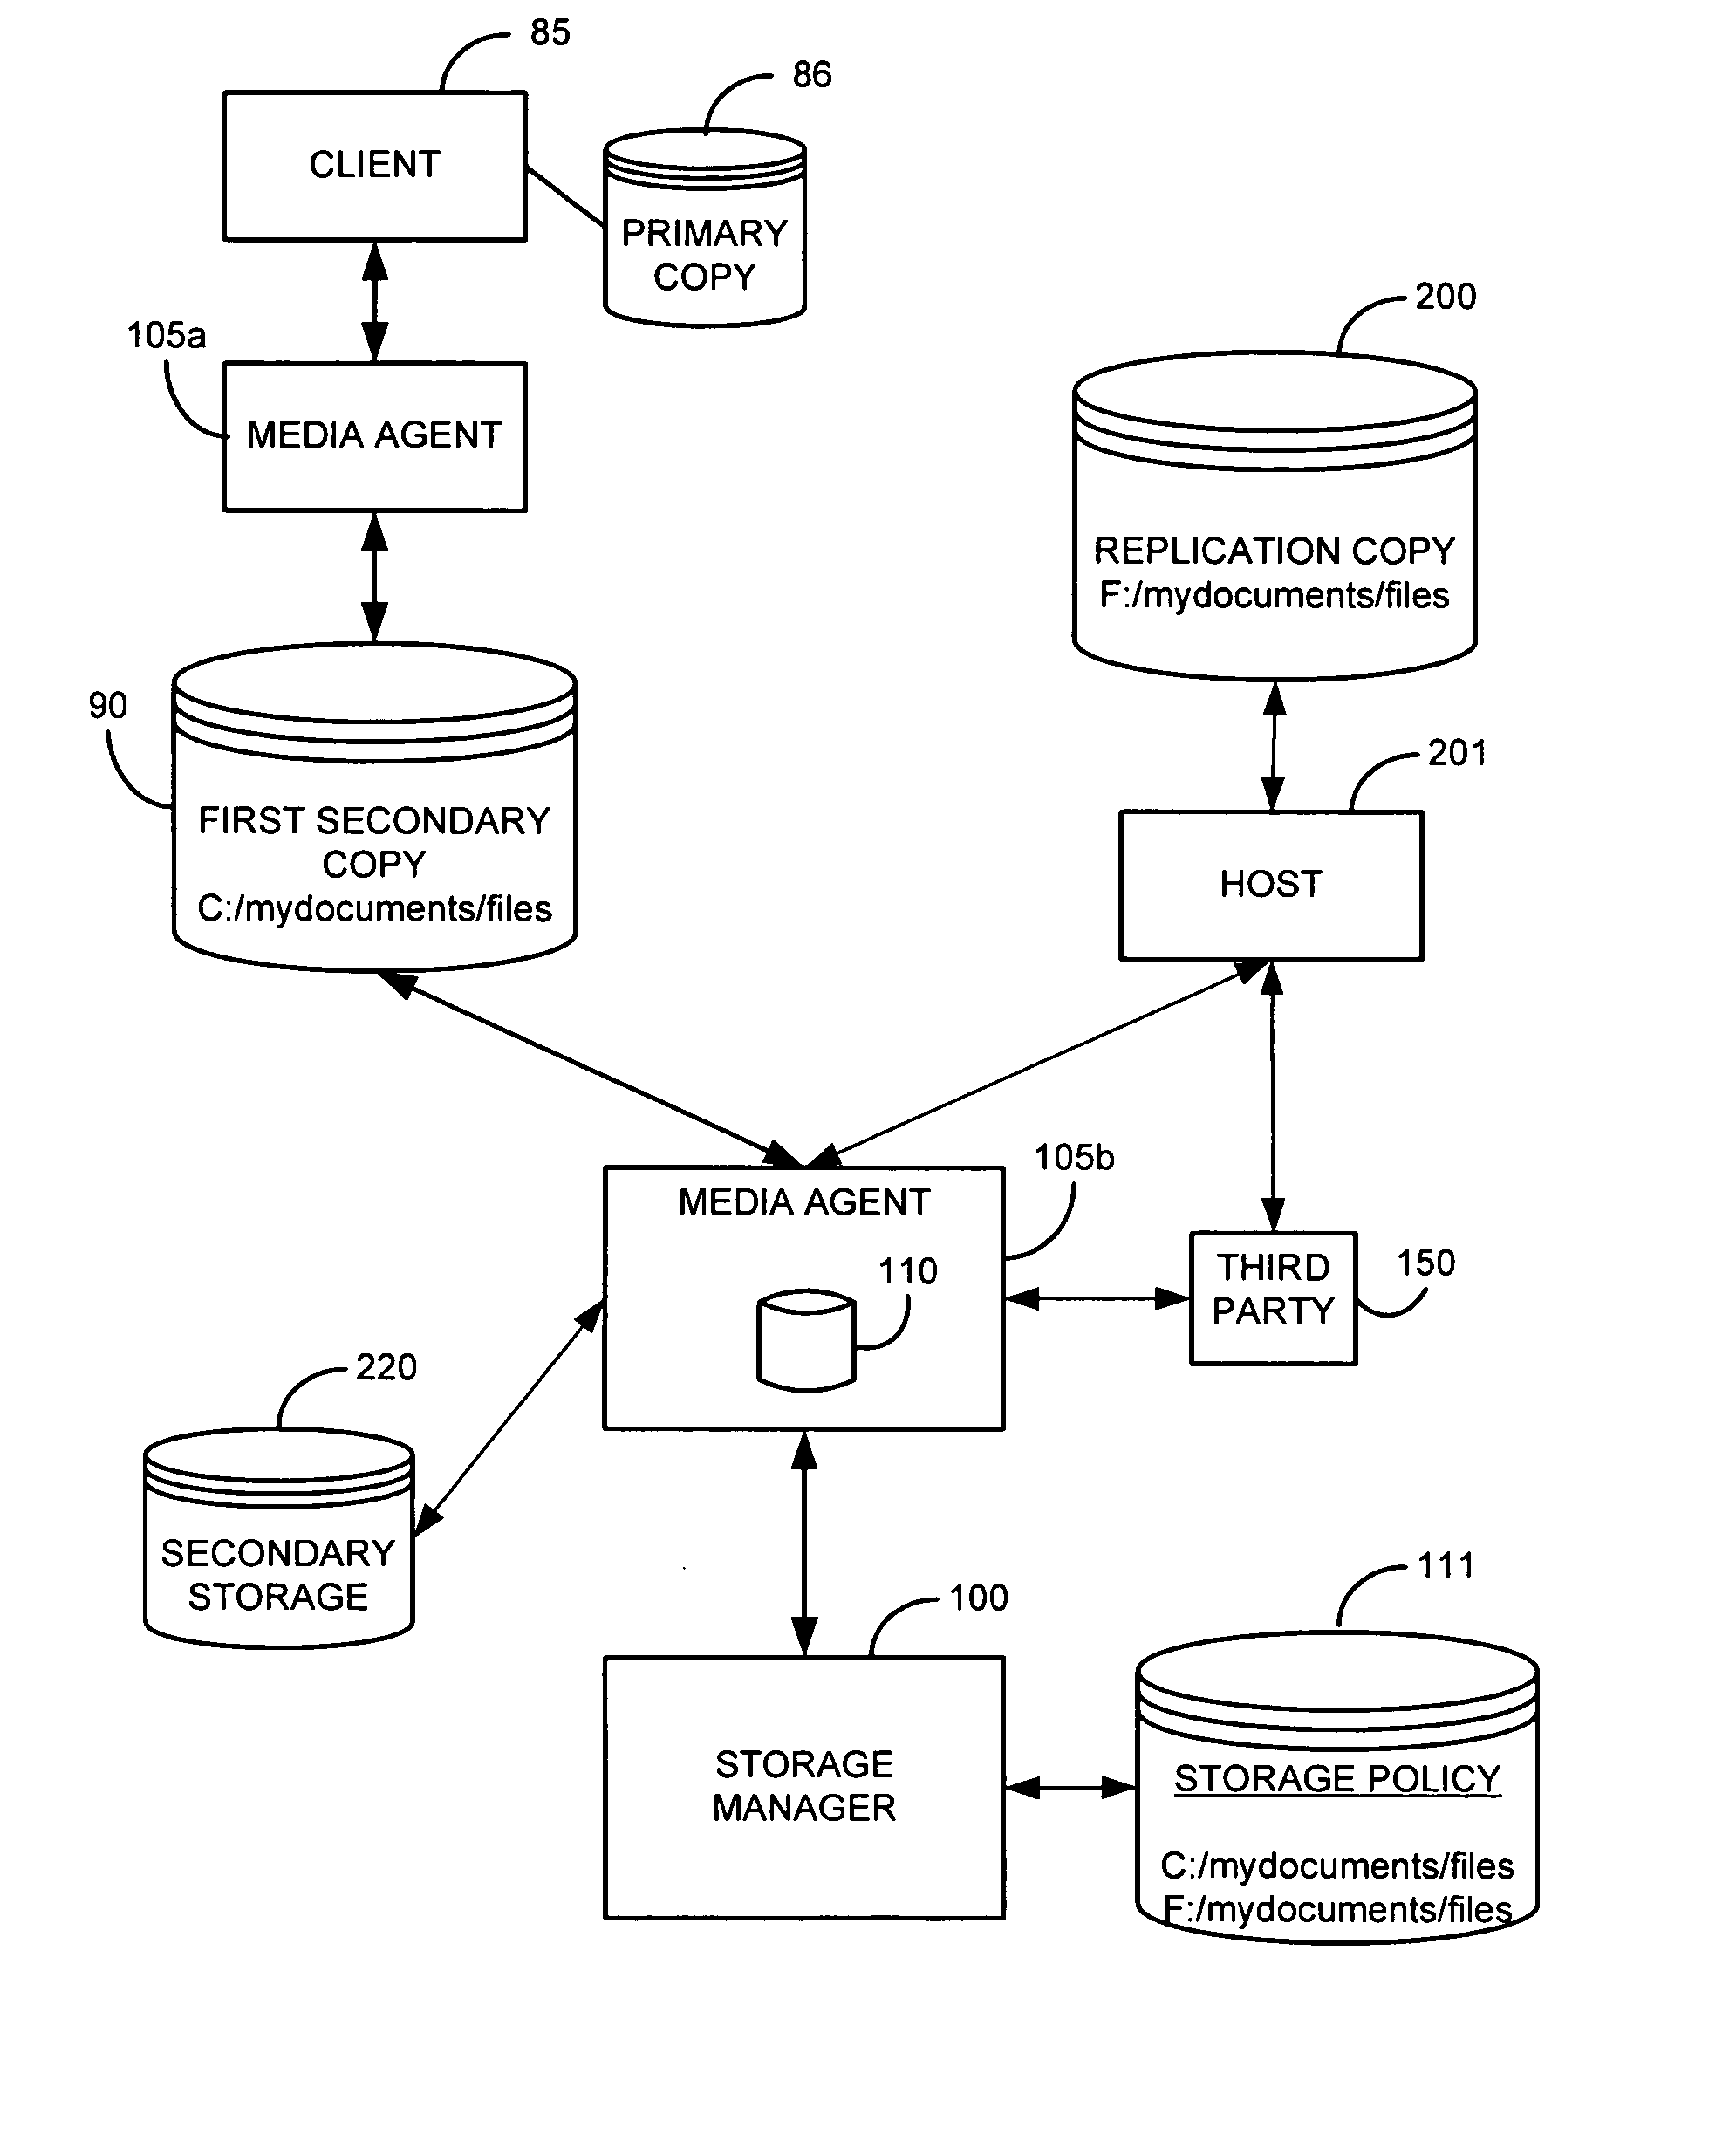 System and method for performing replication copy storage operations